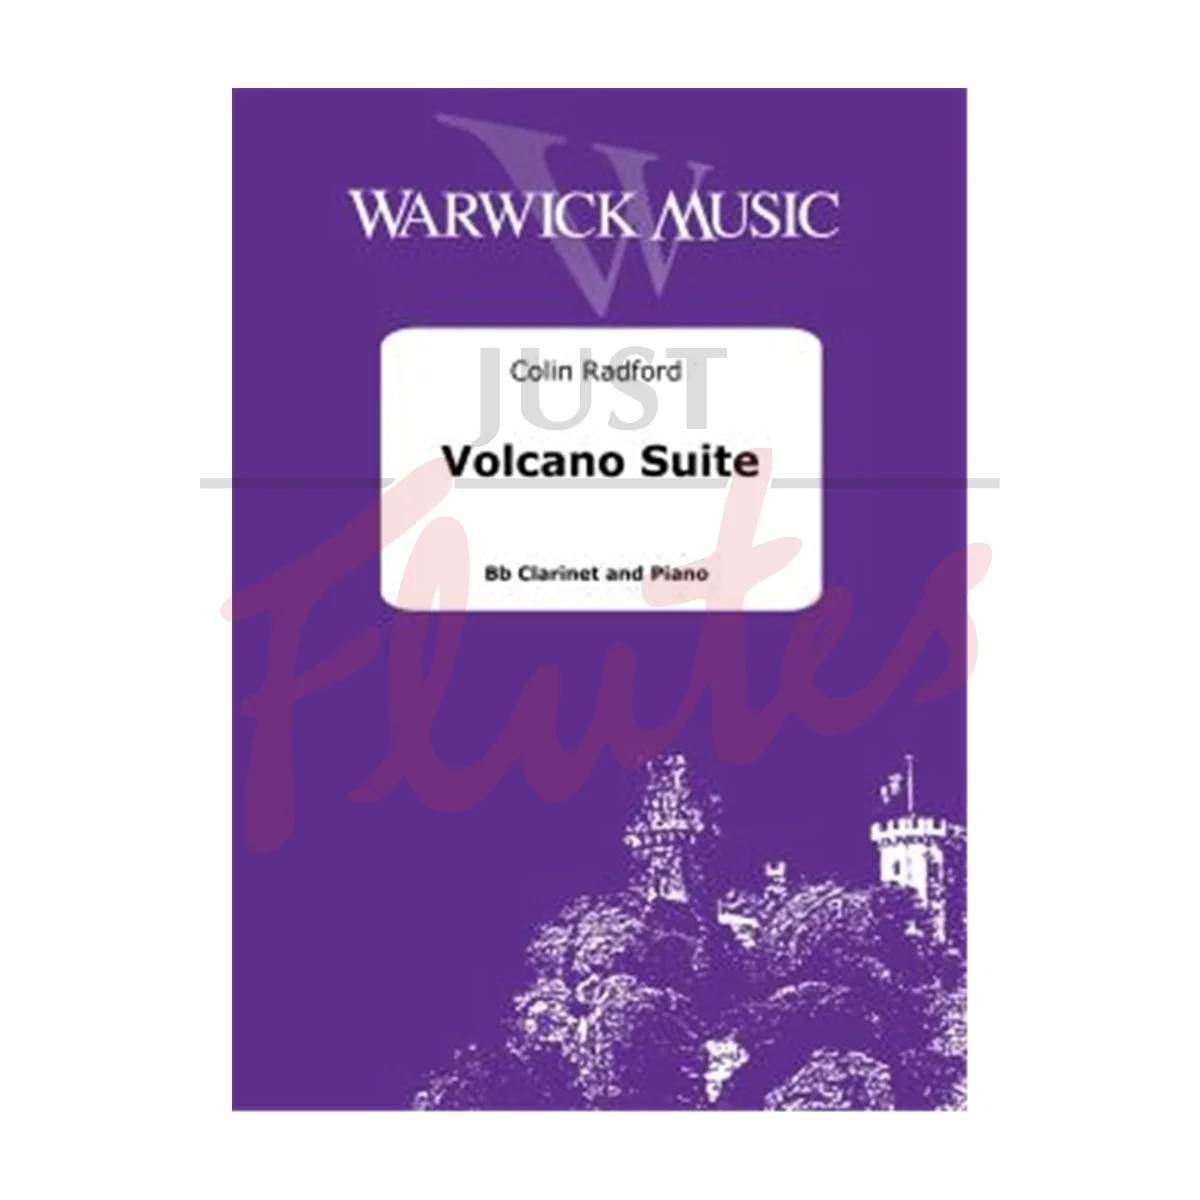 Volcano Suite for Clarinet and Piano